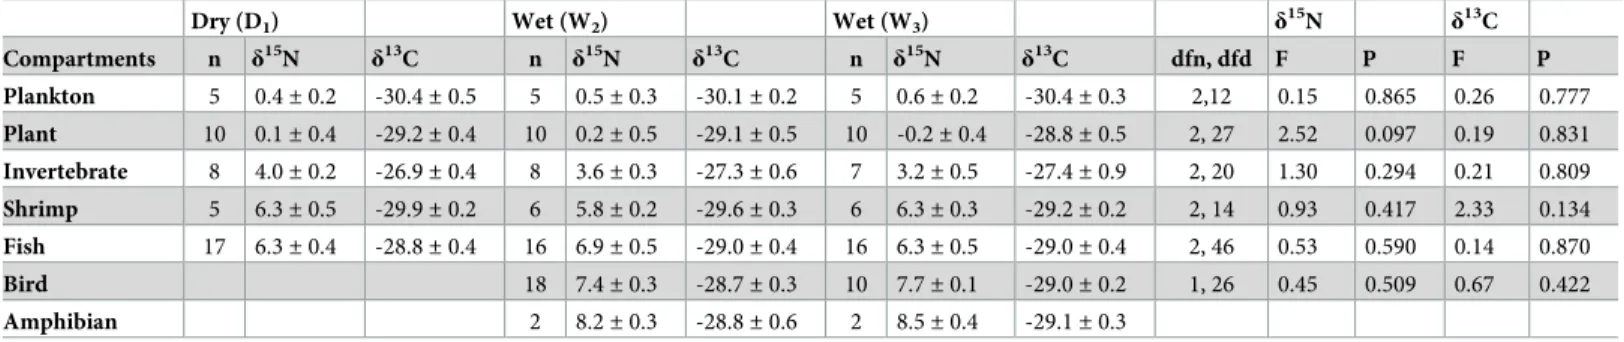 Table 3. Stable isotope values (δ 13 C and δ 15 N, mean ± SE %�) for the different ecosystem compartments sampled across seasons (D 1 , W 2 , W 3 )